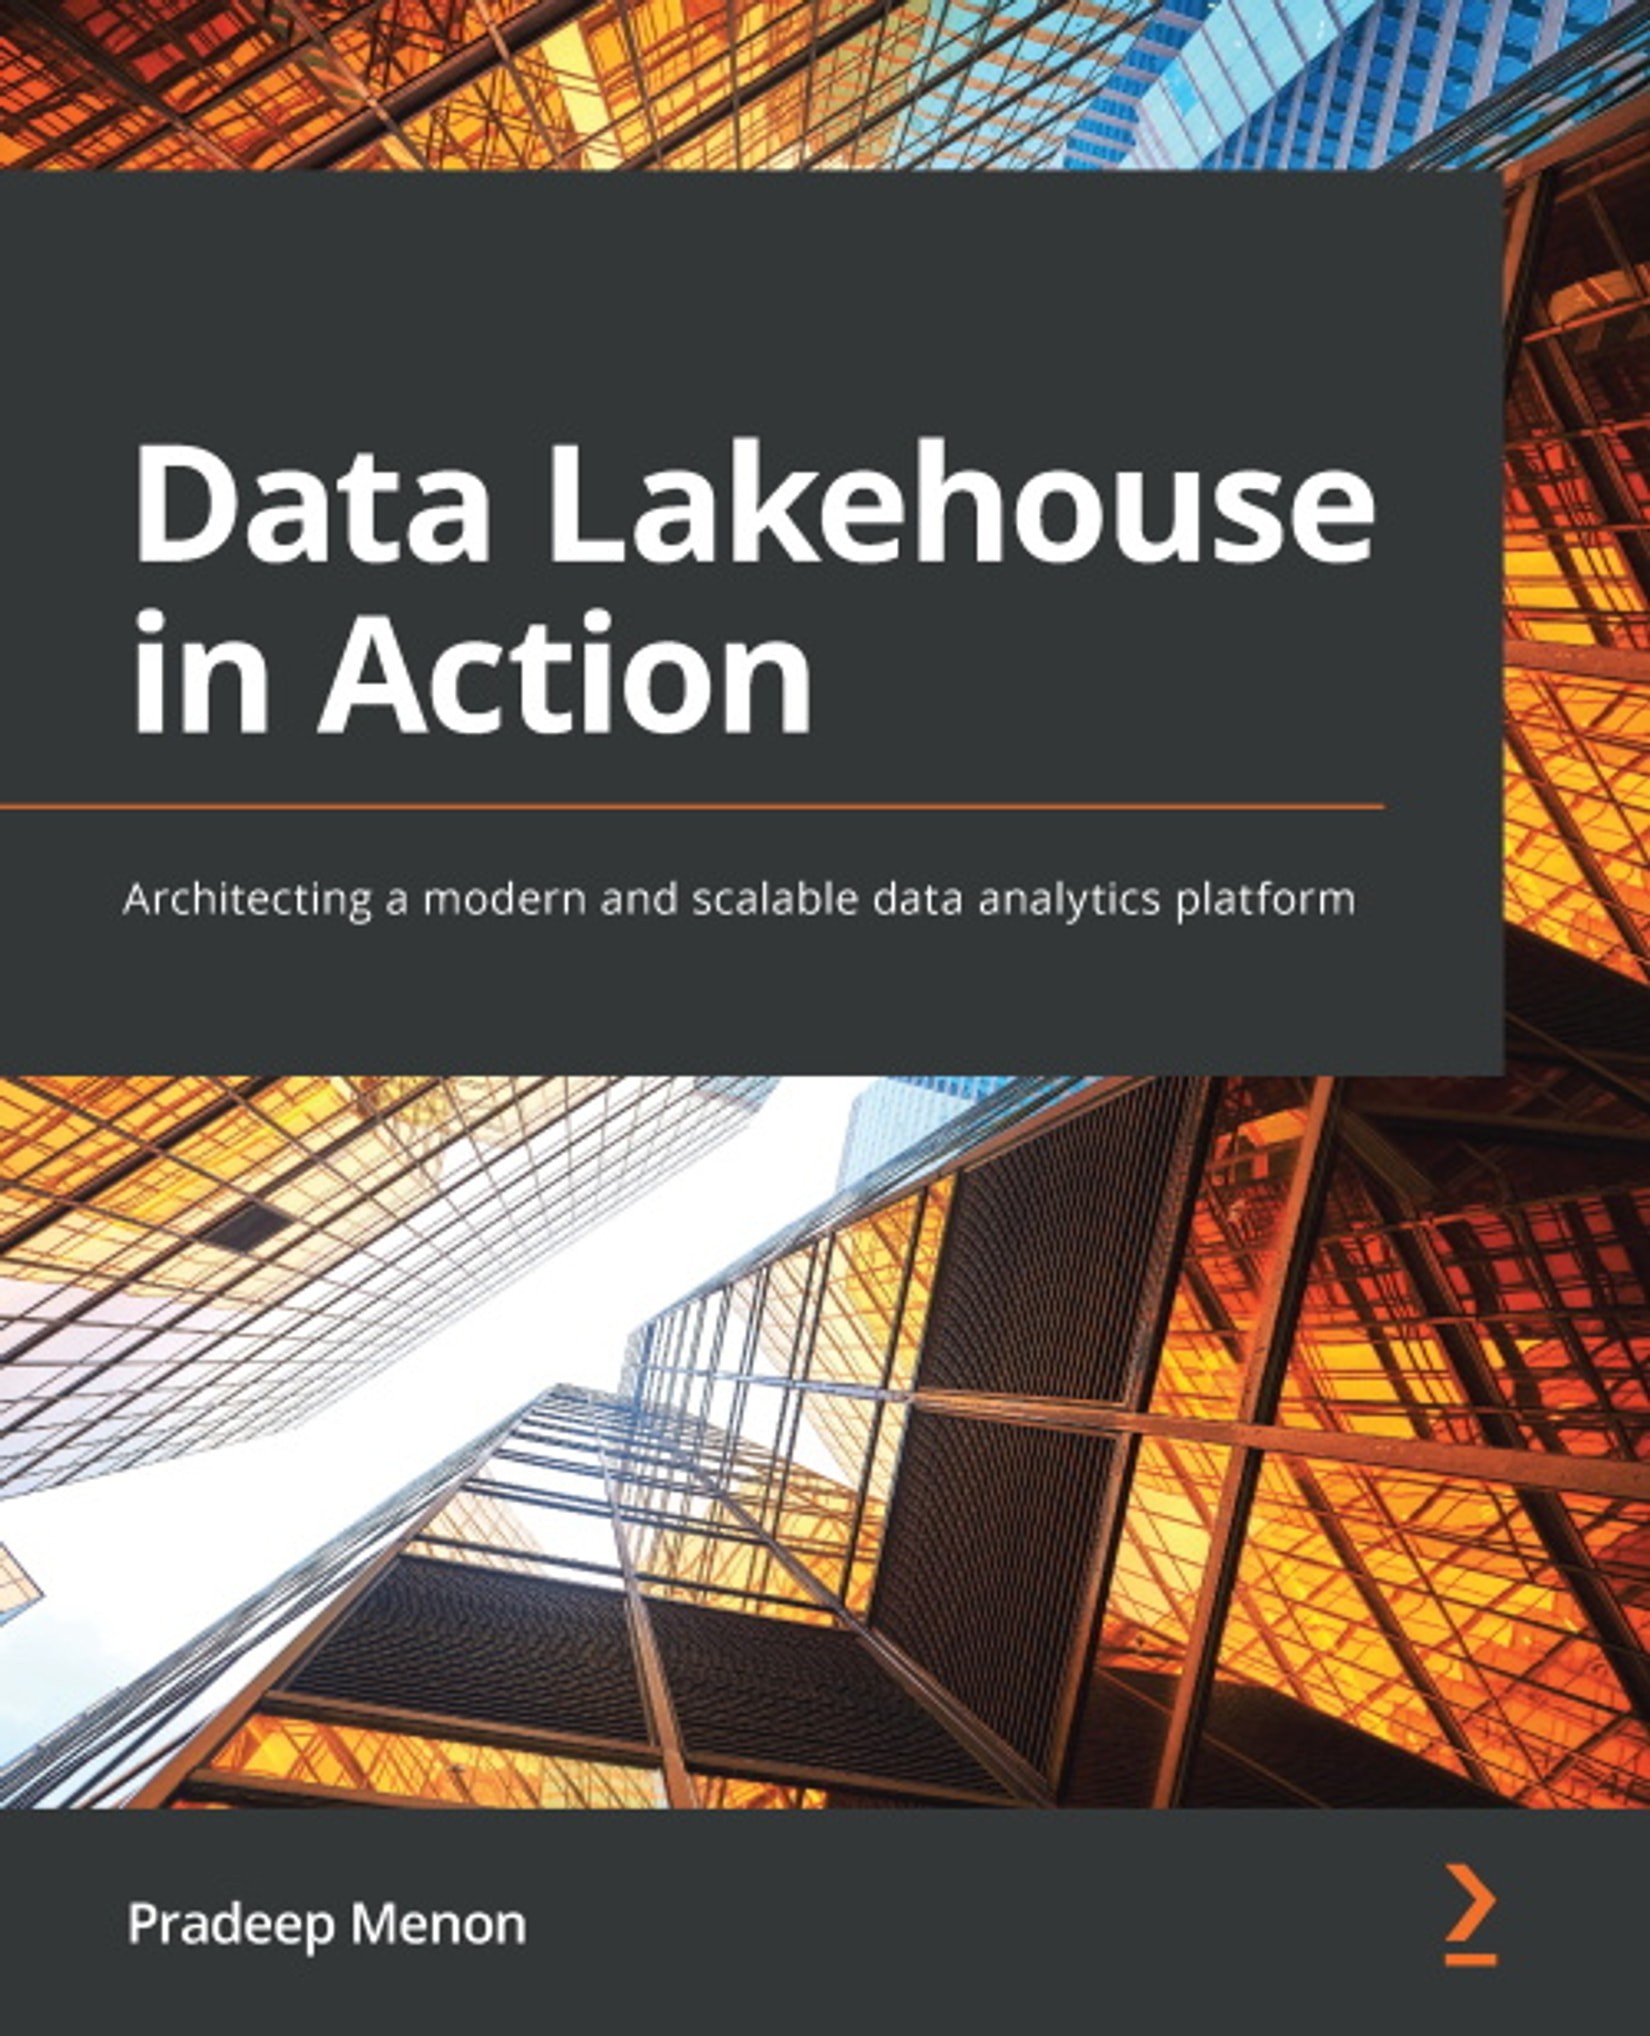 Data Lakehouse in Action: Architecting a Modern and Scalable Data Analytics Platform